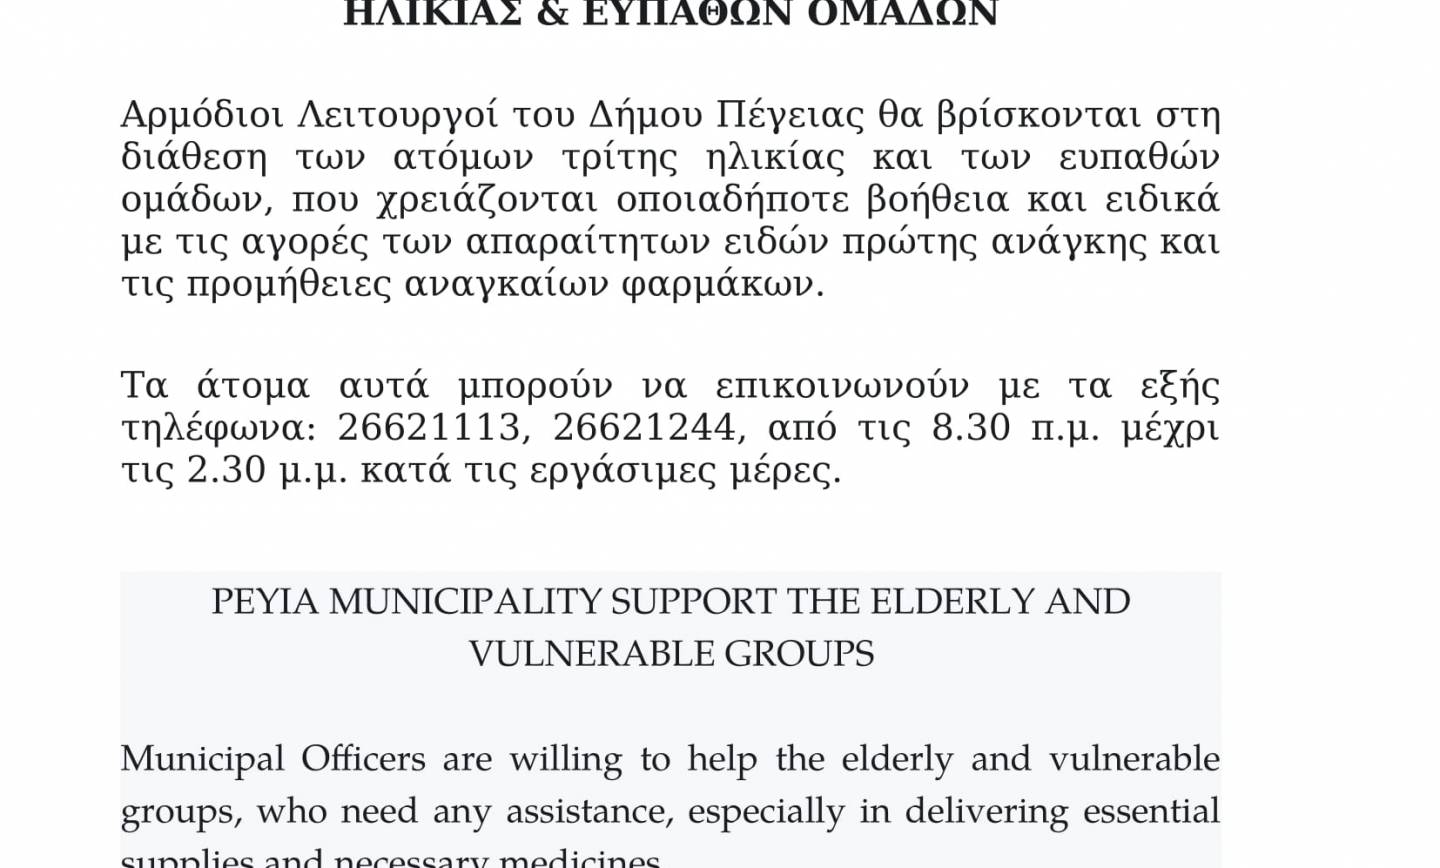 PEYIA MUNICIPALITY SUPPORT THE ELDERLY AND VULNERABLE GROUPS